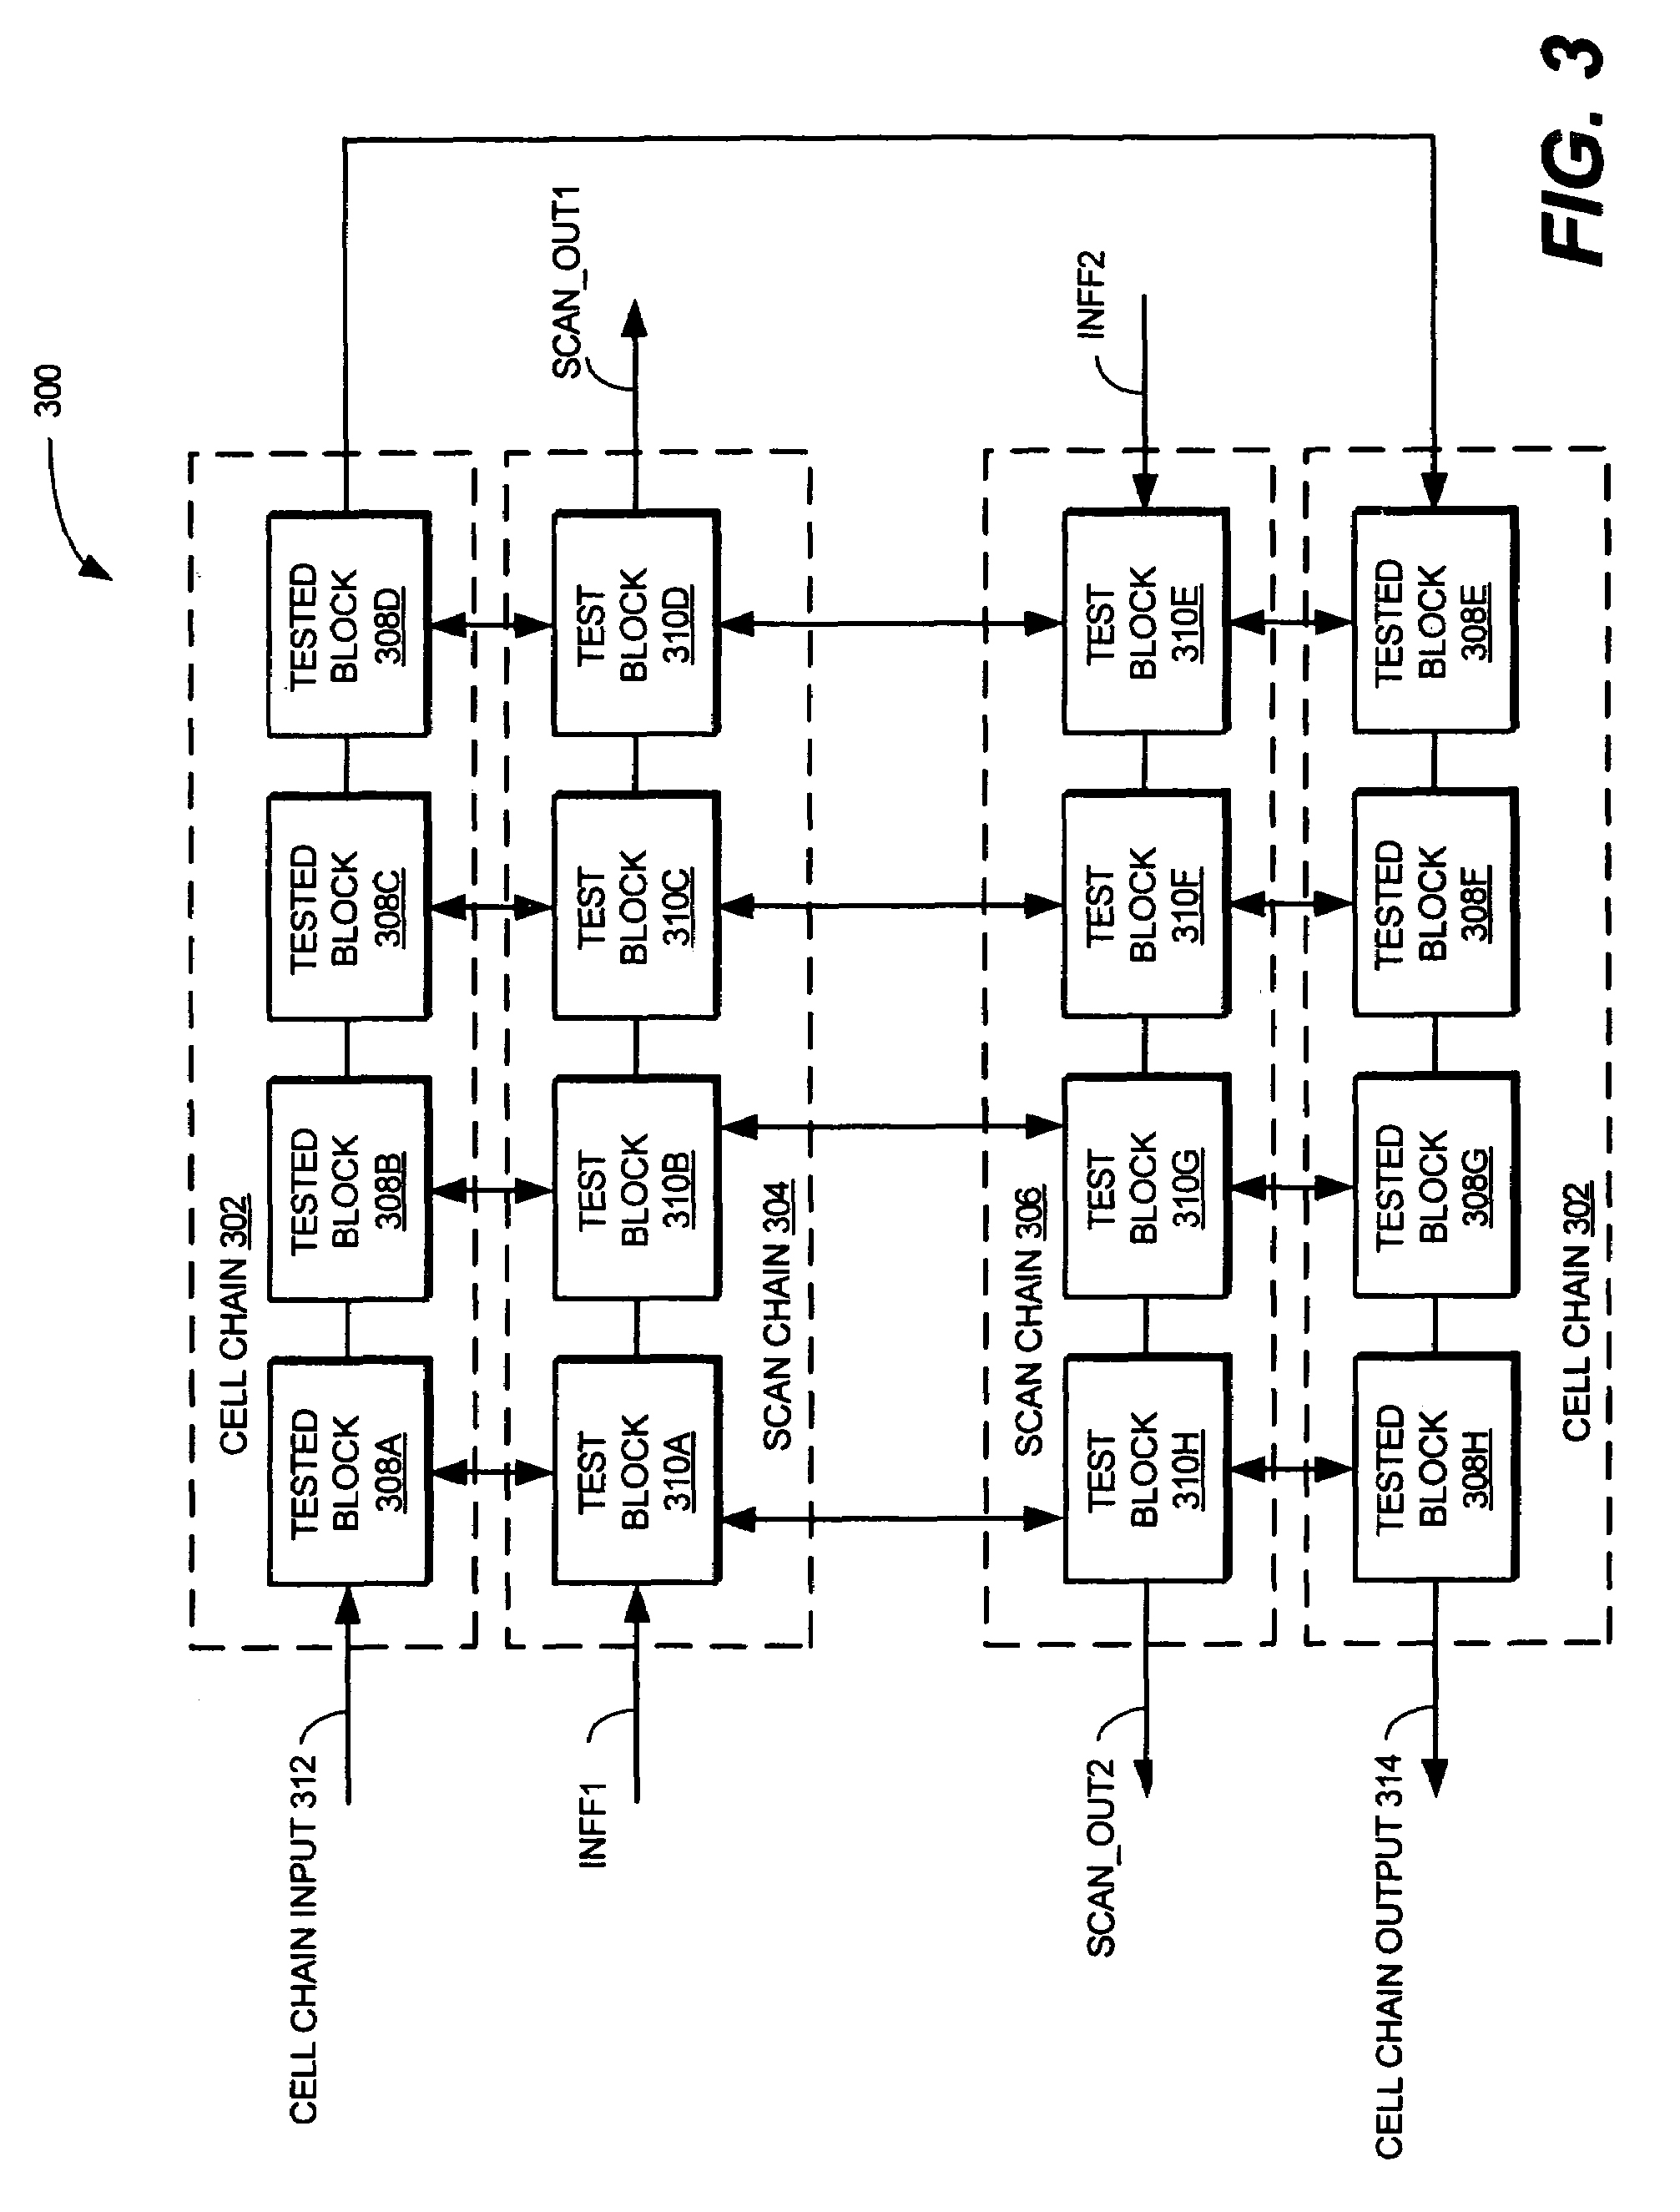 Method and apparatus for determining stuck-at fault locations in cell chains using scan chains